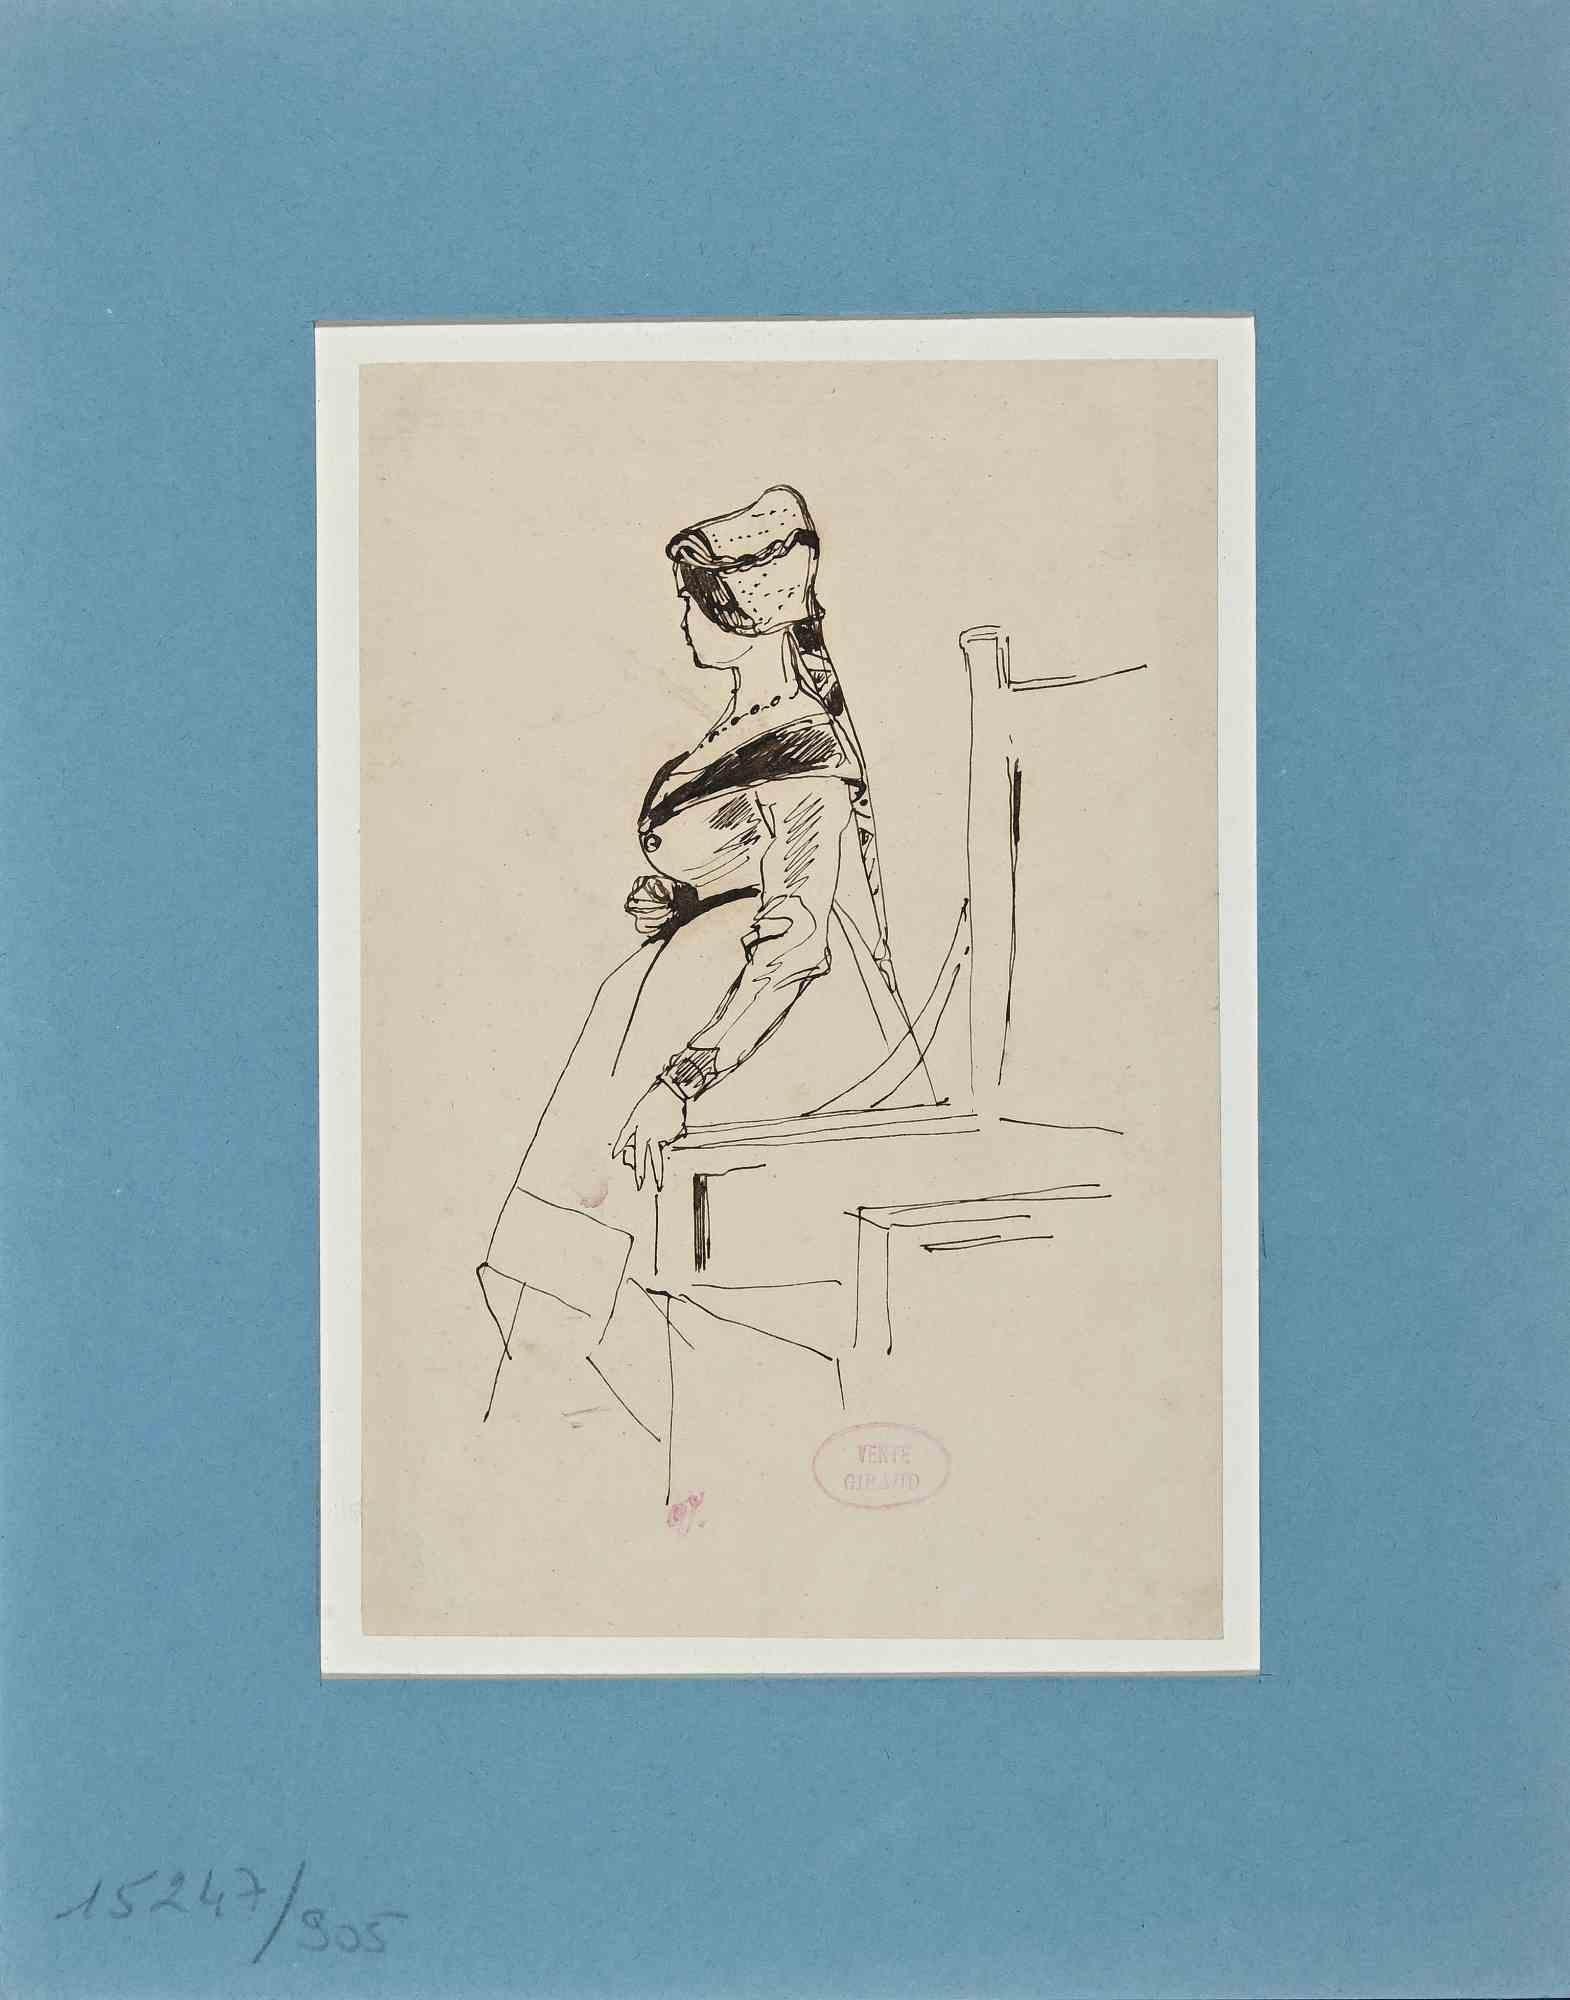 Profile of Woman - Original Drawing on Paper by E. Giraud - Late 19th Century - Art by Eugène Giraud